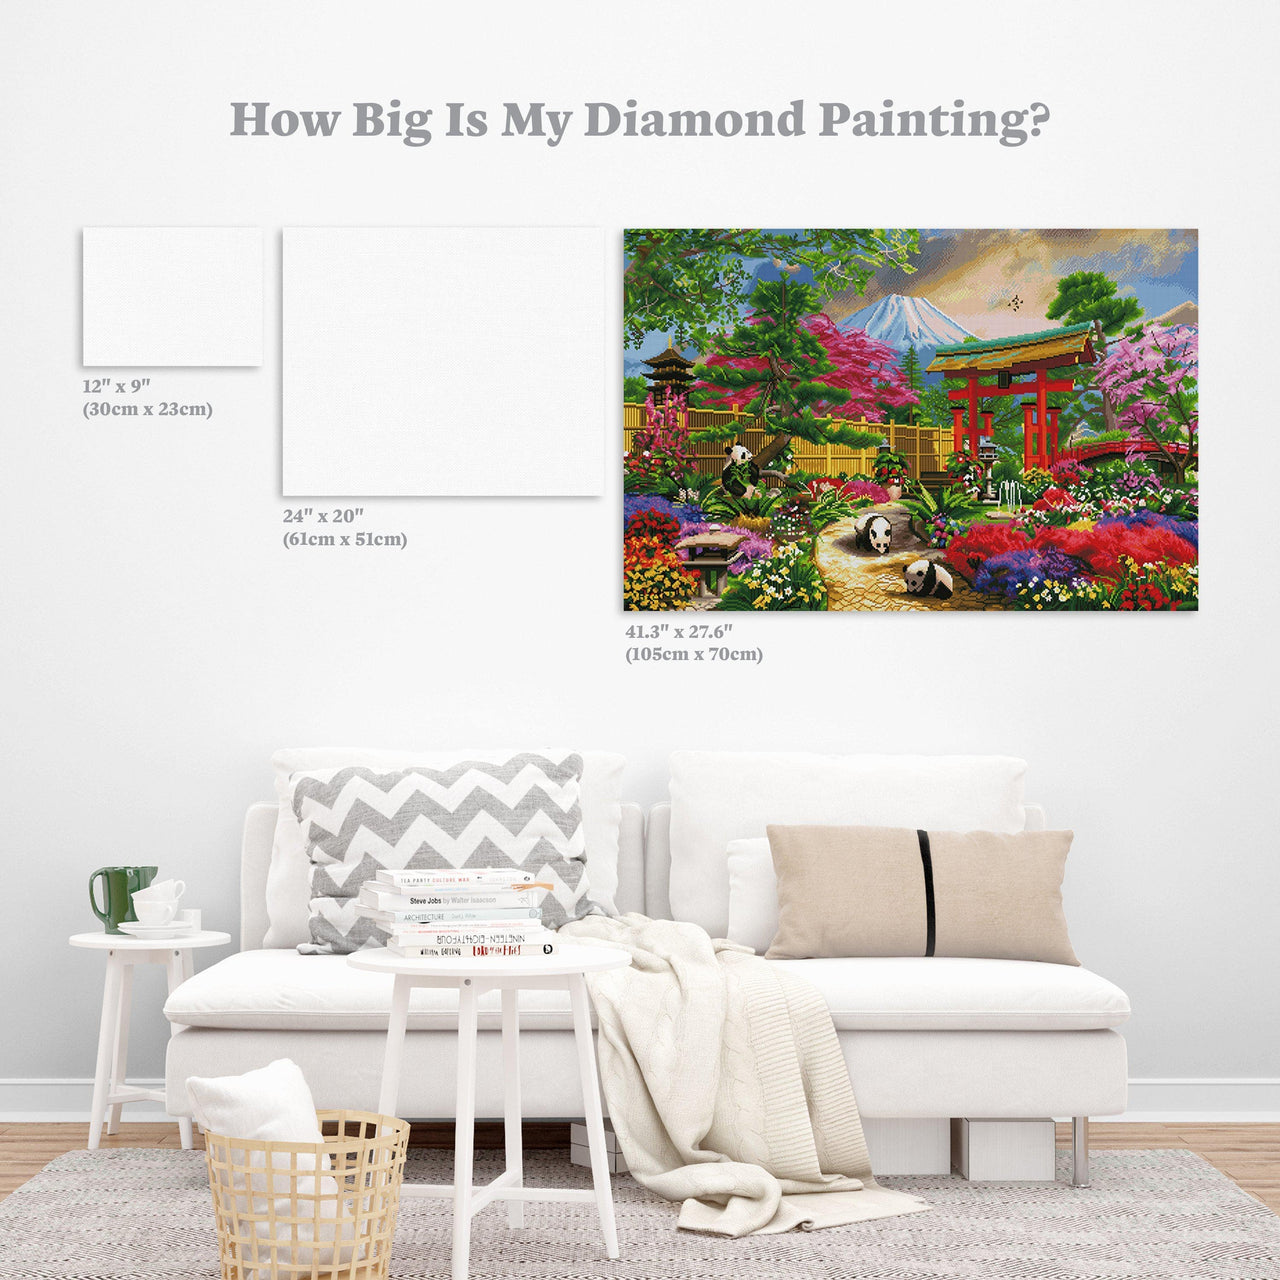 Diamond Painting Fuji Flora 41.3" x 27.6″ (105cm x 70cm) / Square with 66 Colors including 3 ABs / 115232